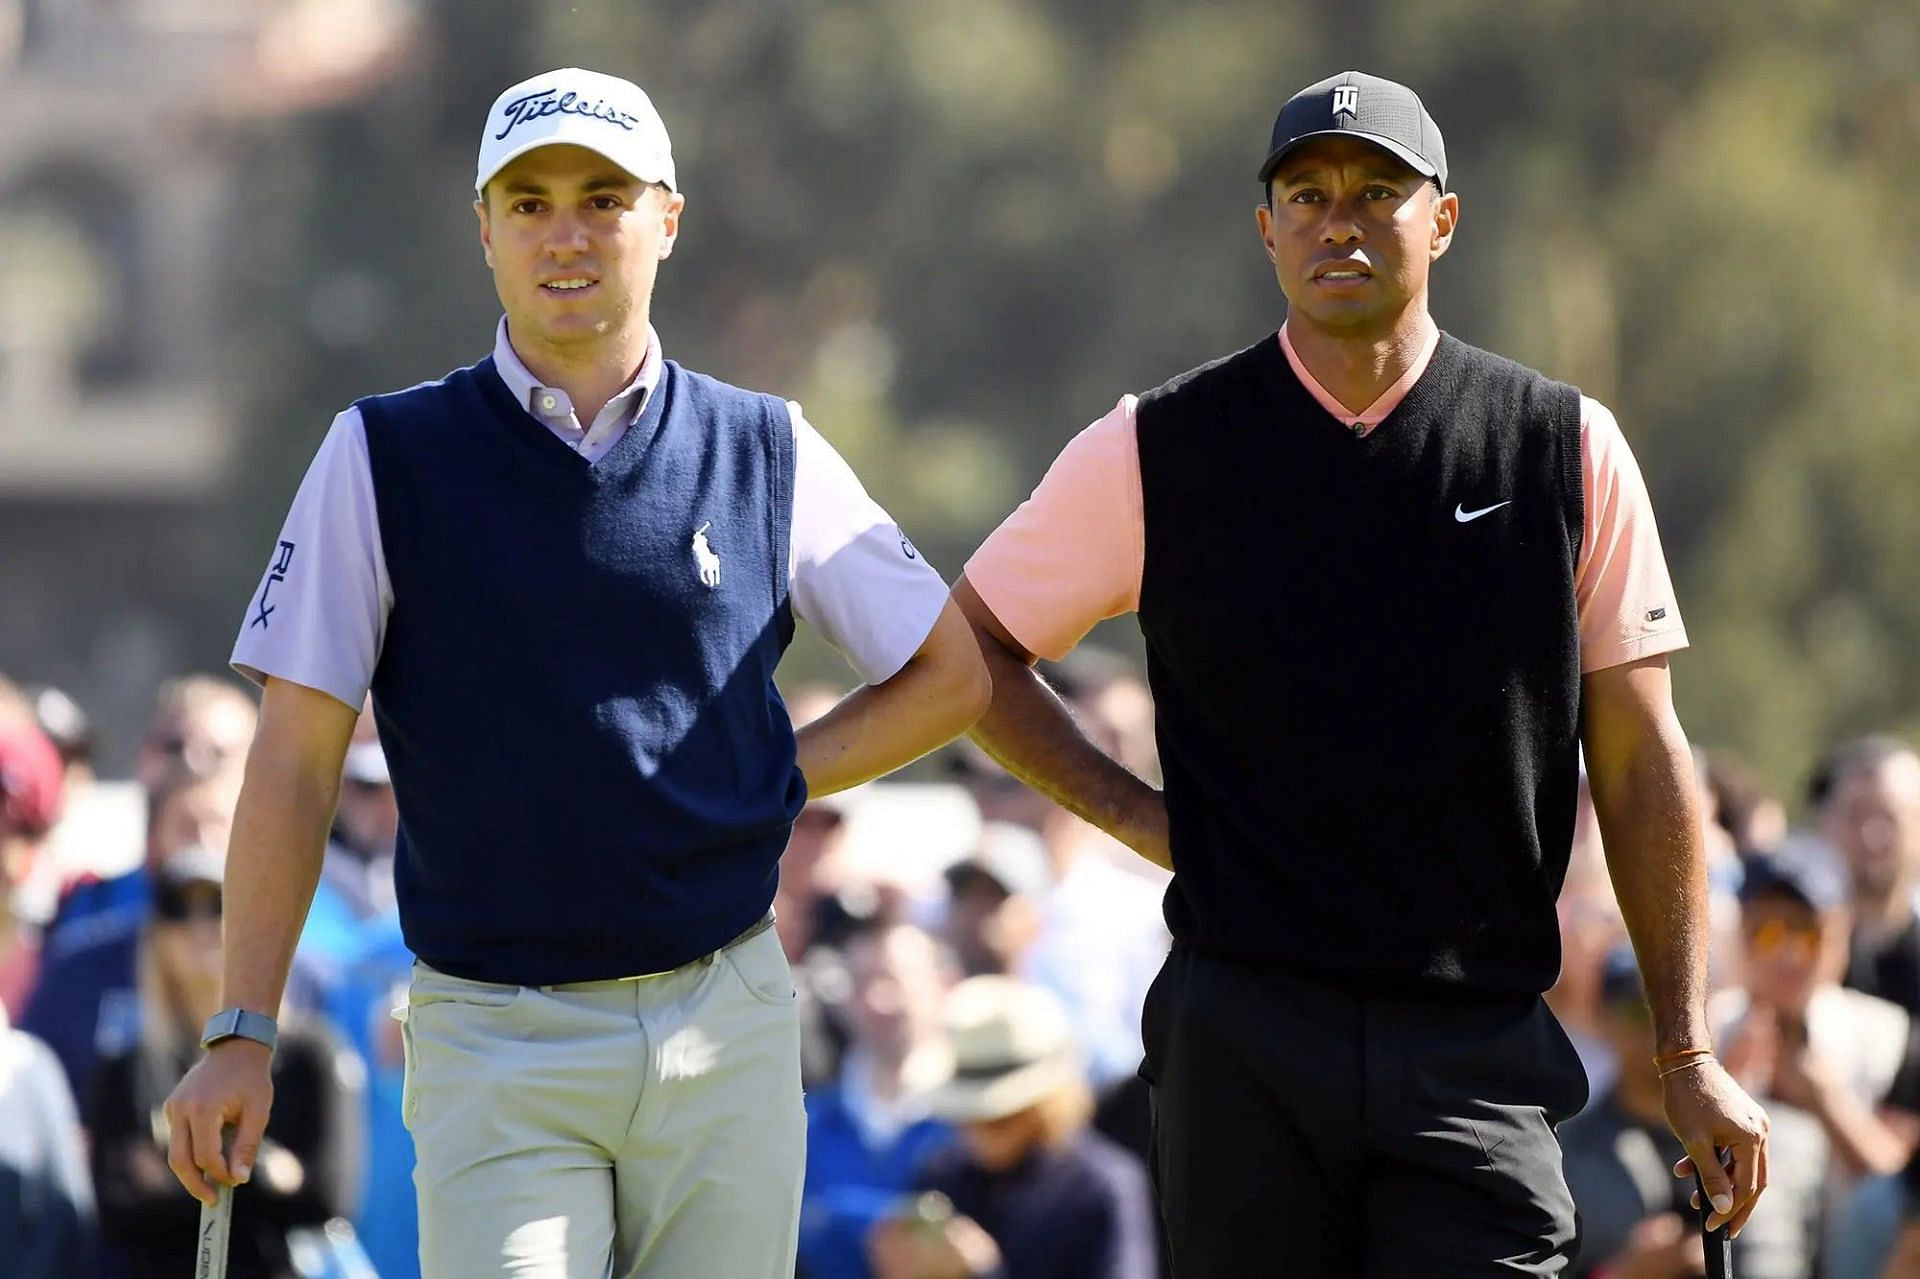 iger woods and Justin Thomas (image via: Getty)